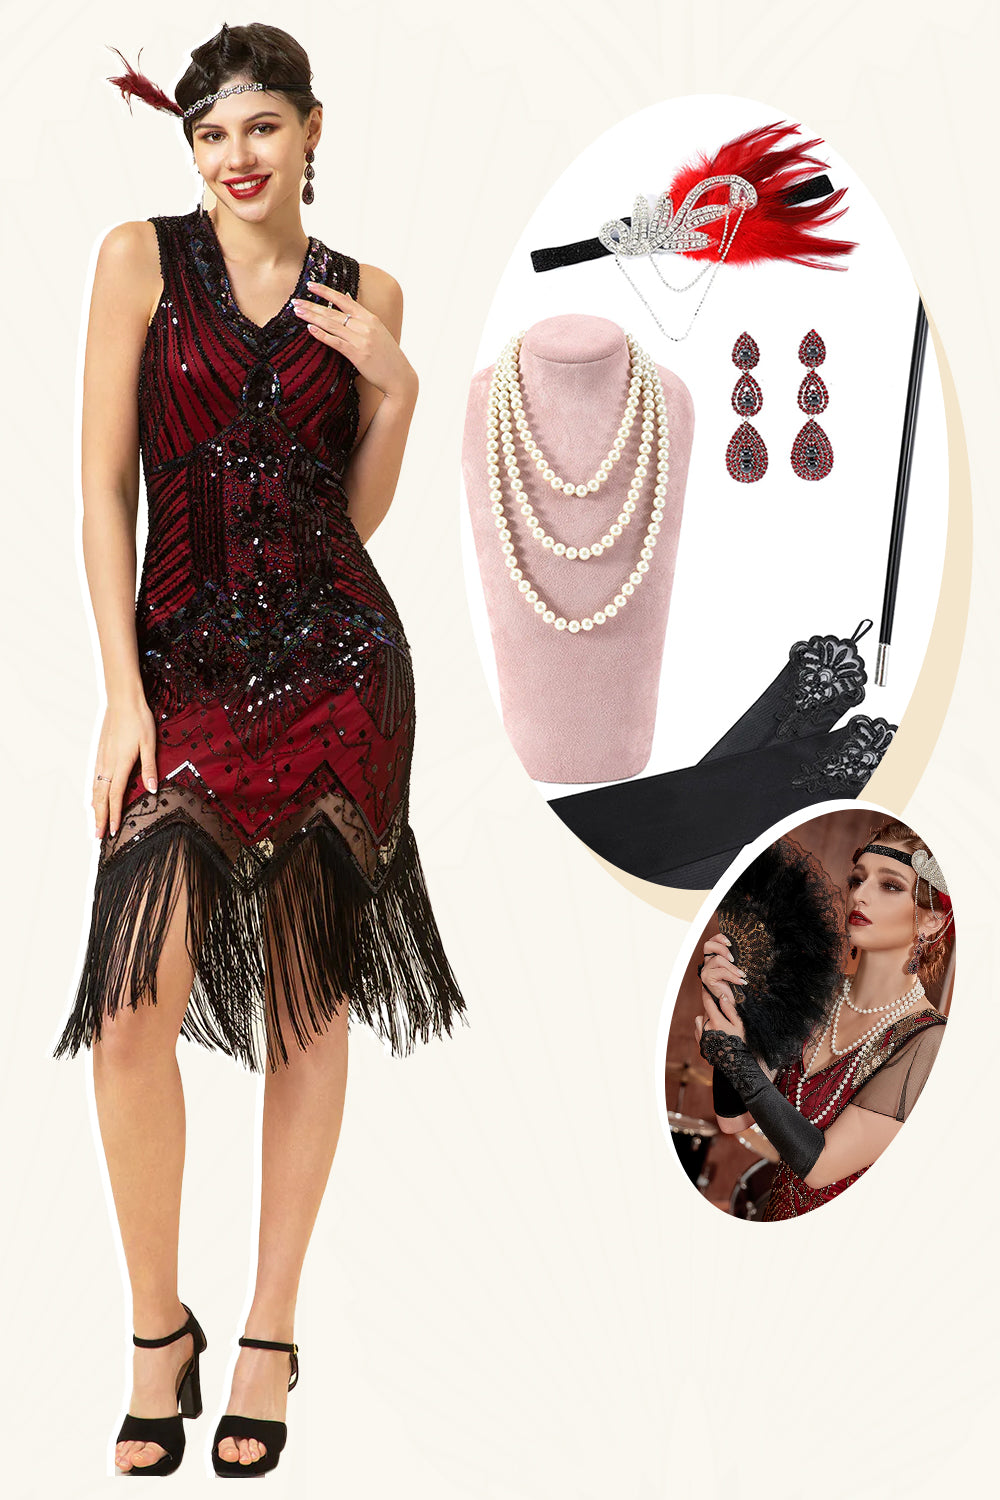 Red and Black Sequins Fringes 1920s Gatsby Dress with 20s Accessories Set